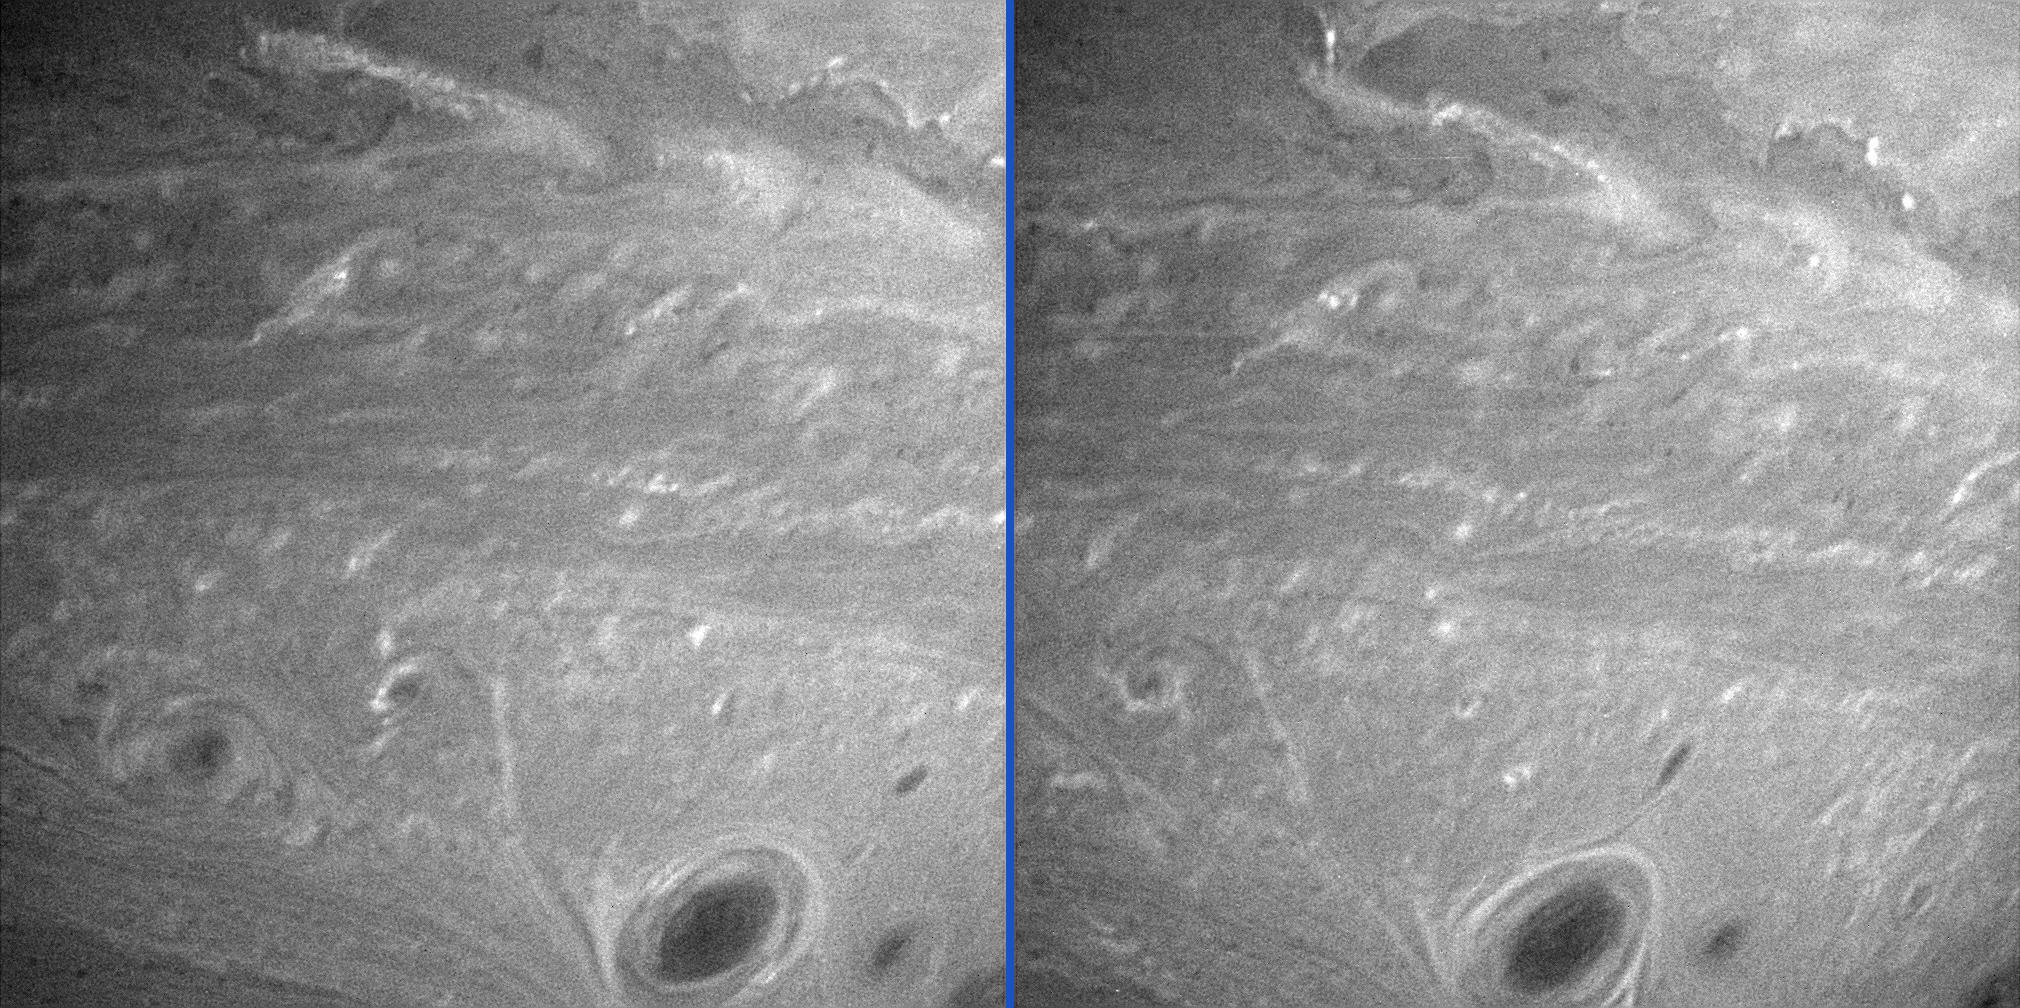 Vortices mingle amidst other turbulent motions in Saturn's atmosphere in these two comparison images